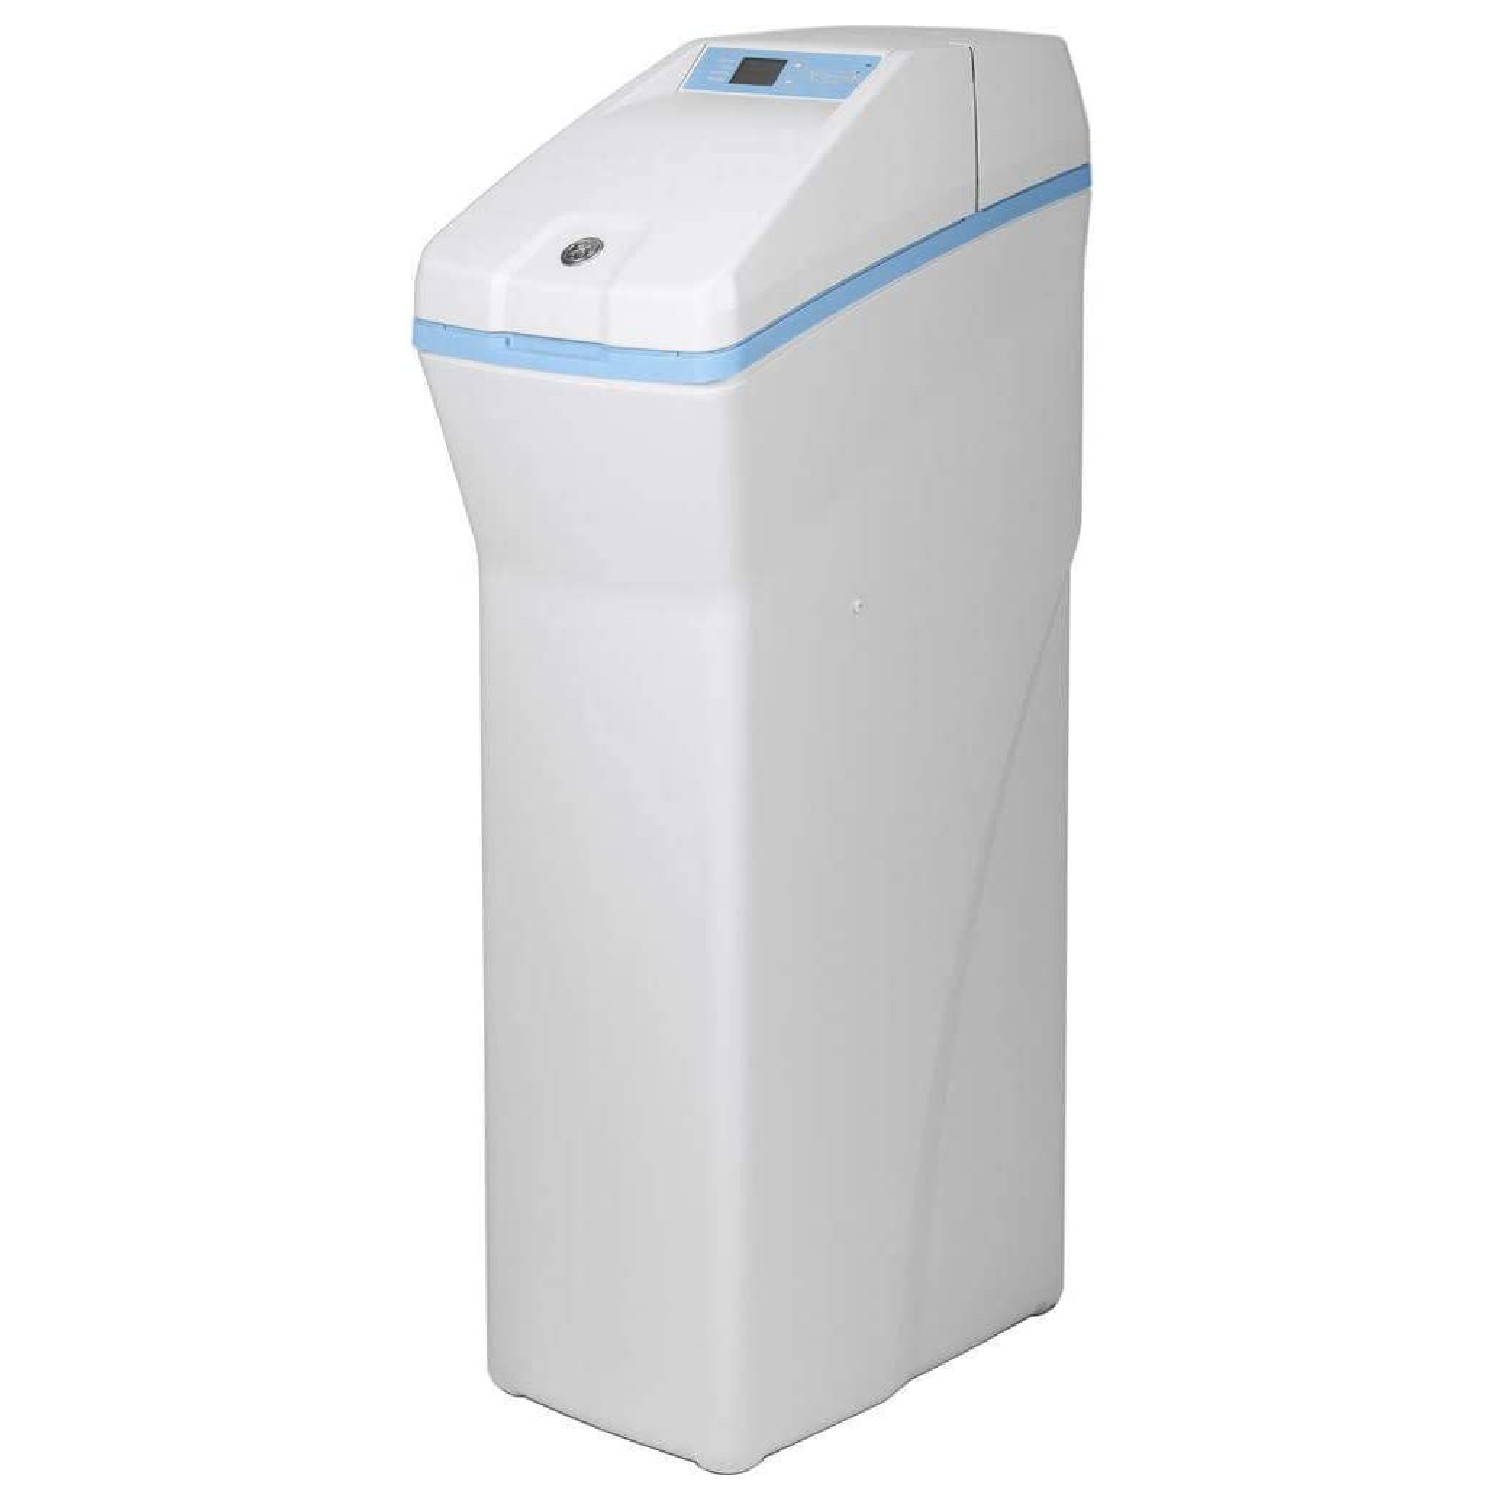 11 Best Water Softeners for Your Home (2021) | Heavy.com